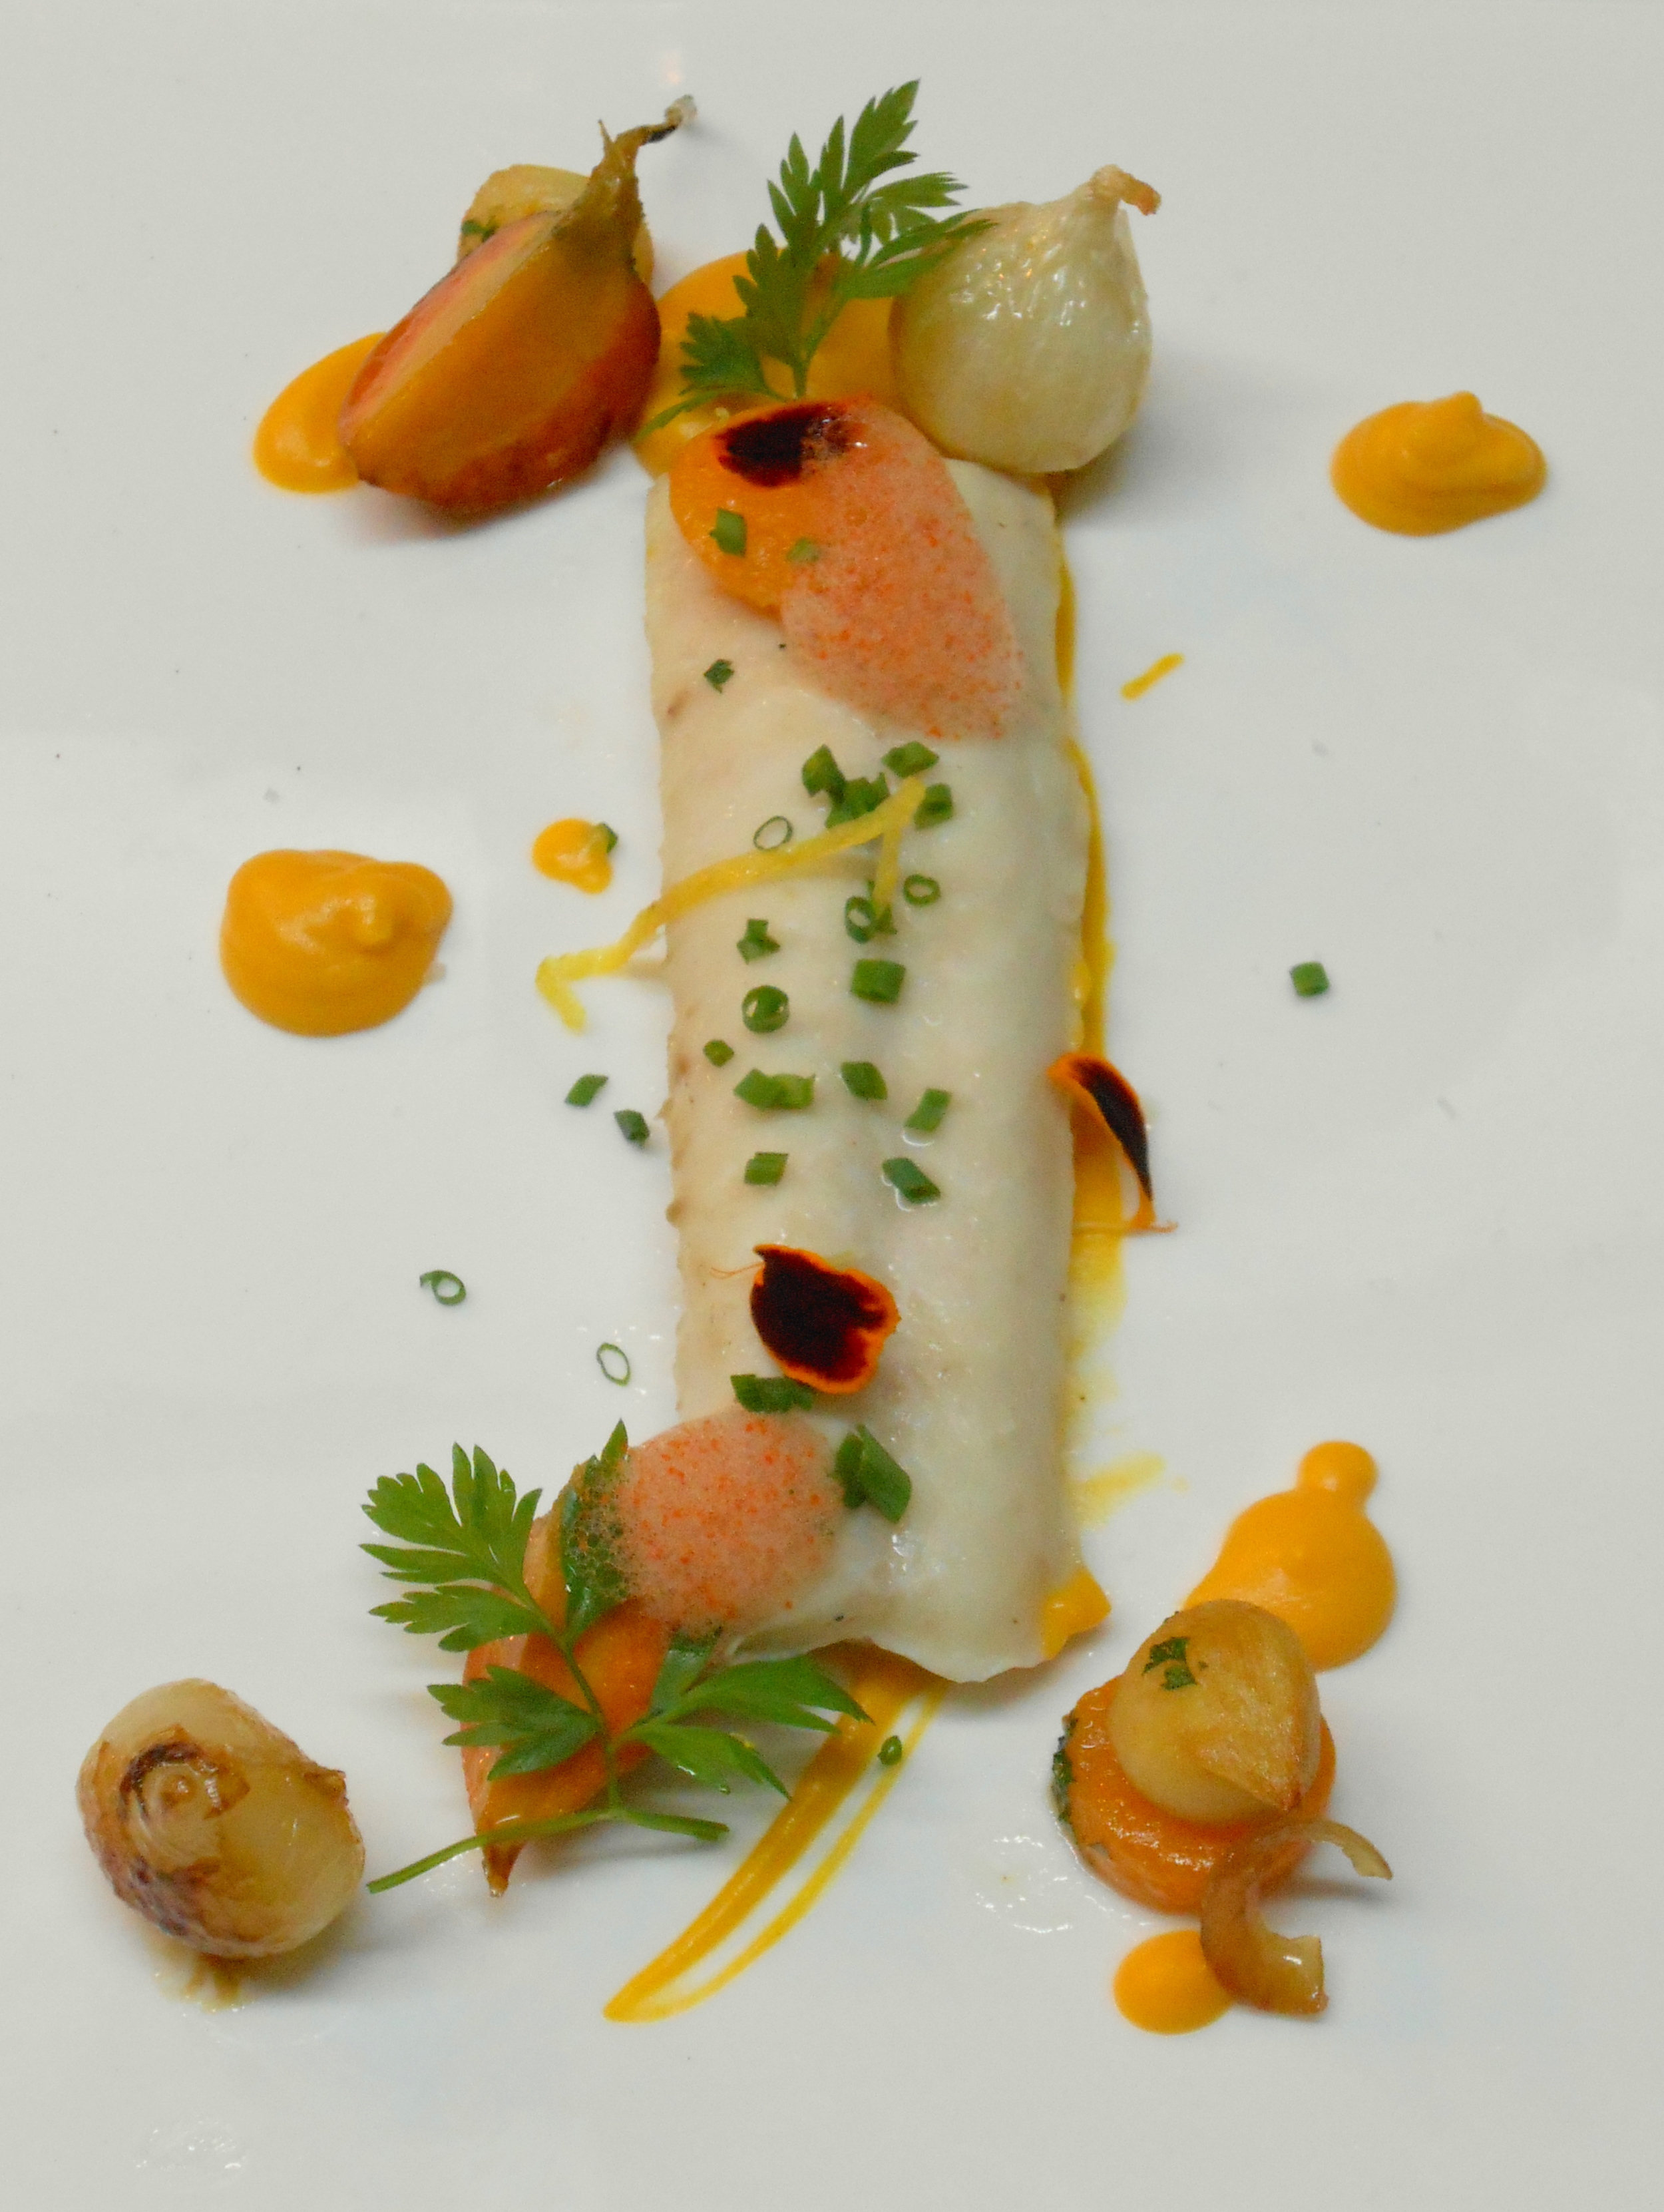 First course: Dogfish, with carrot puree, parsnip, onion confit, and butternut squash.